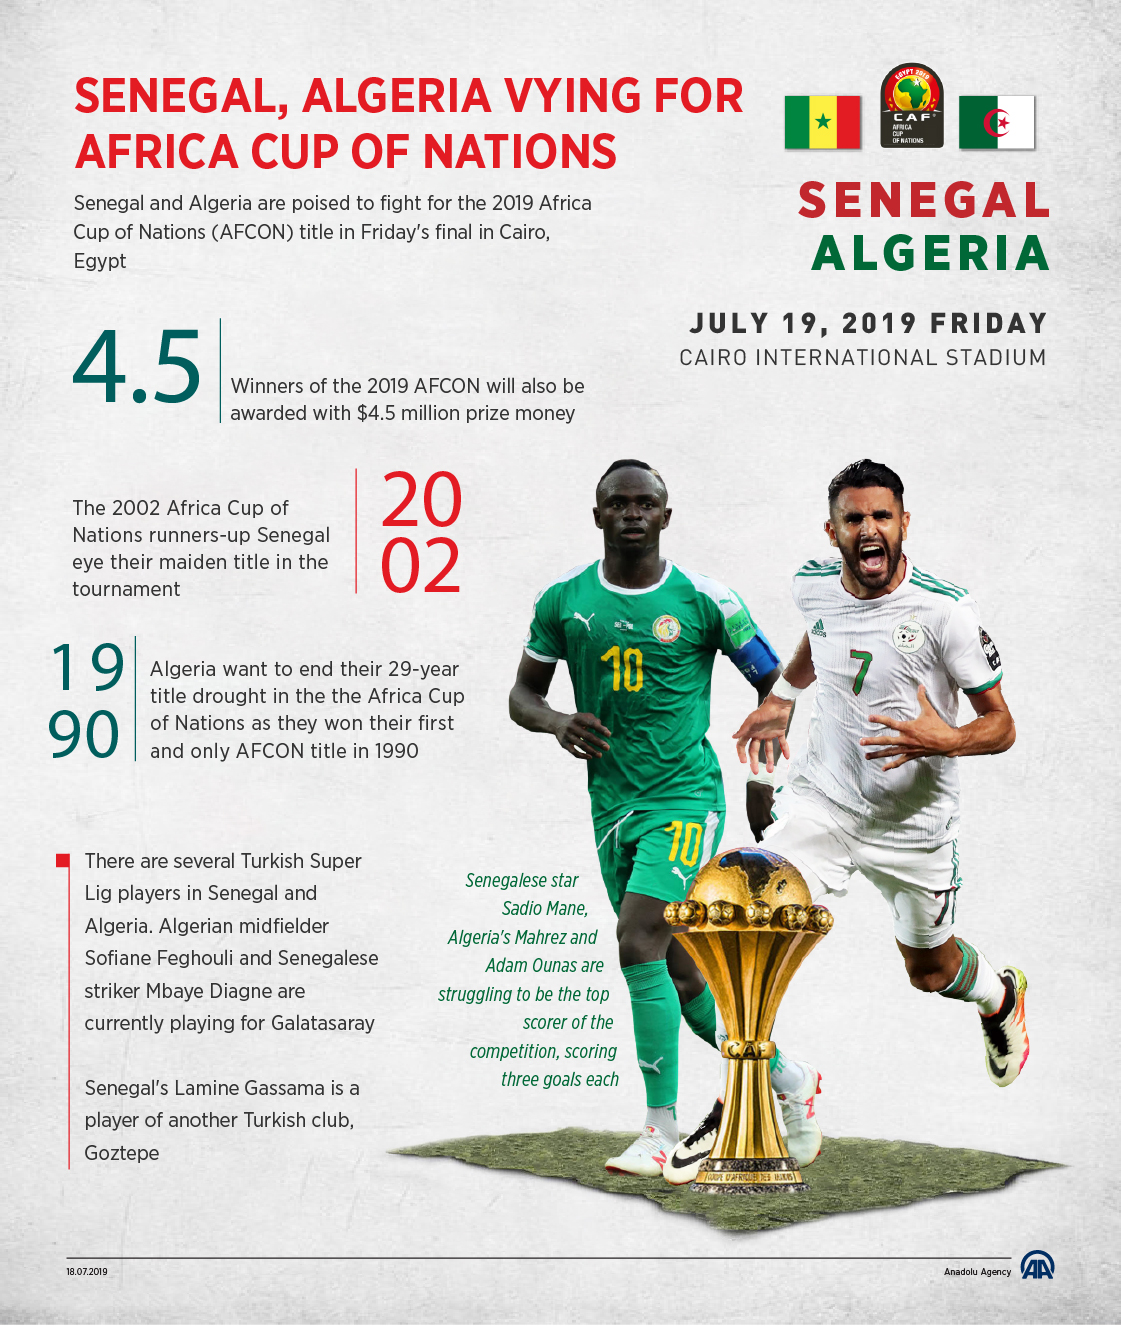 Senegal, Algeria vying for Africa Cup of Nations